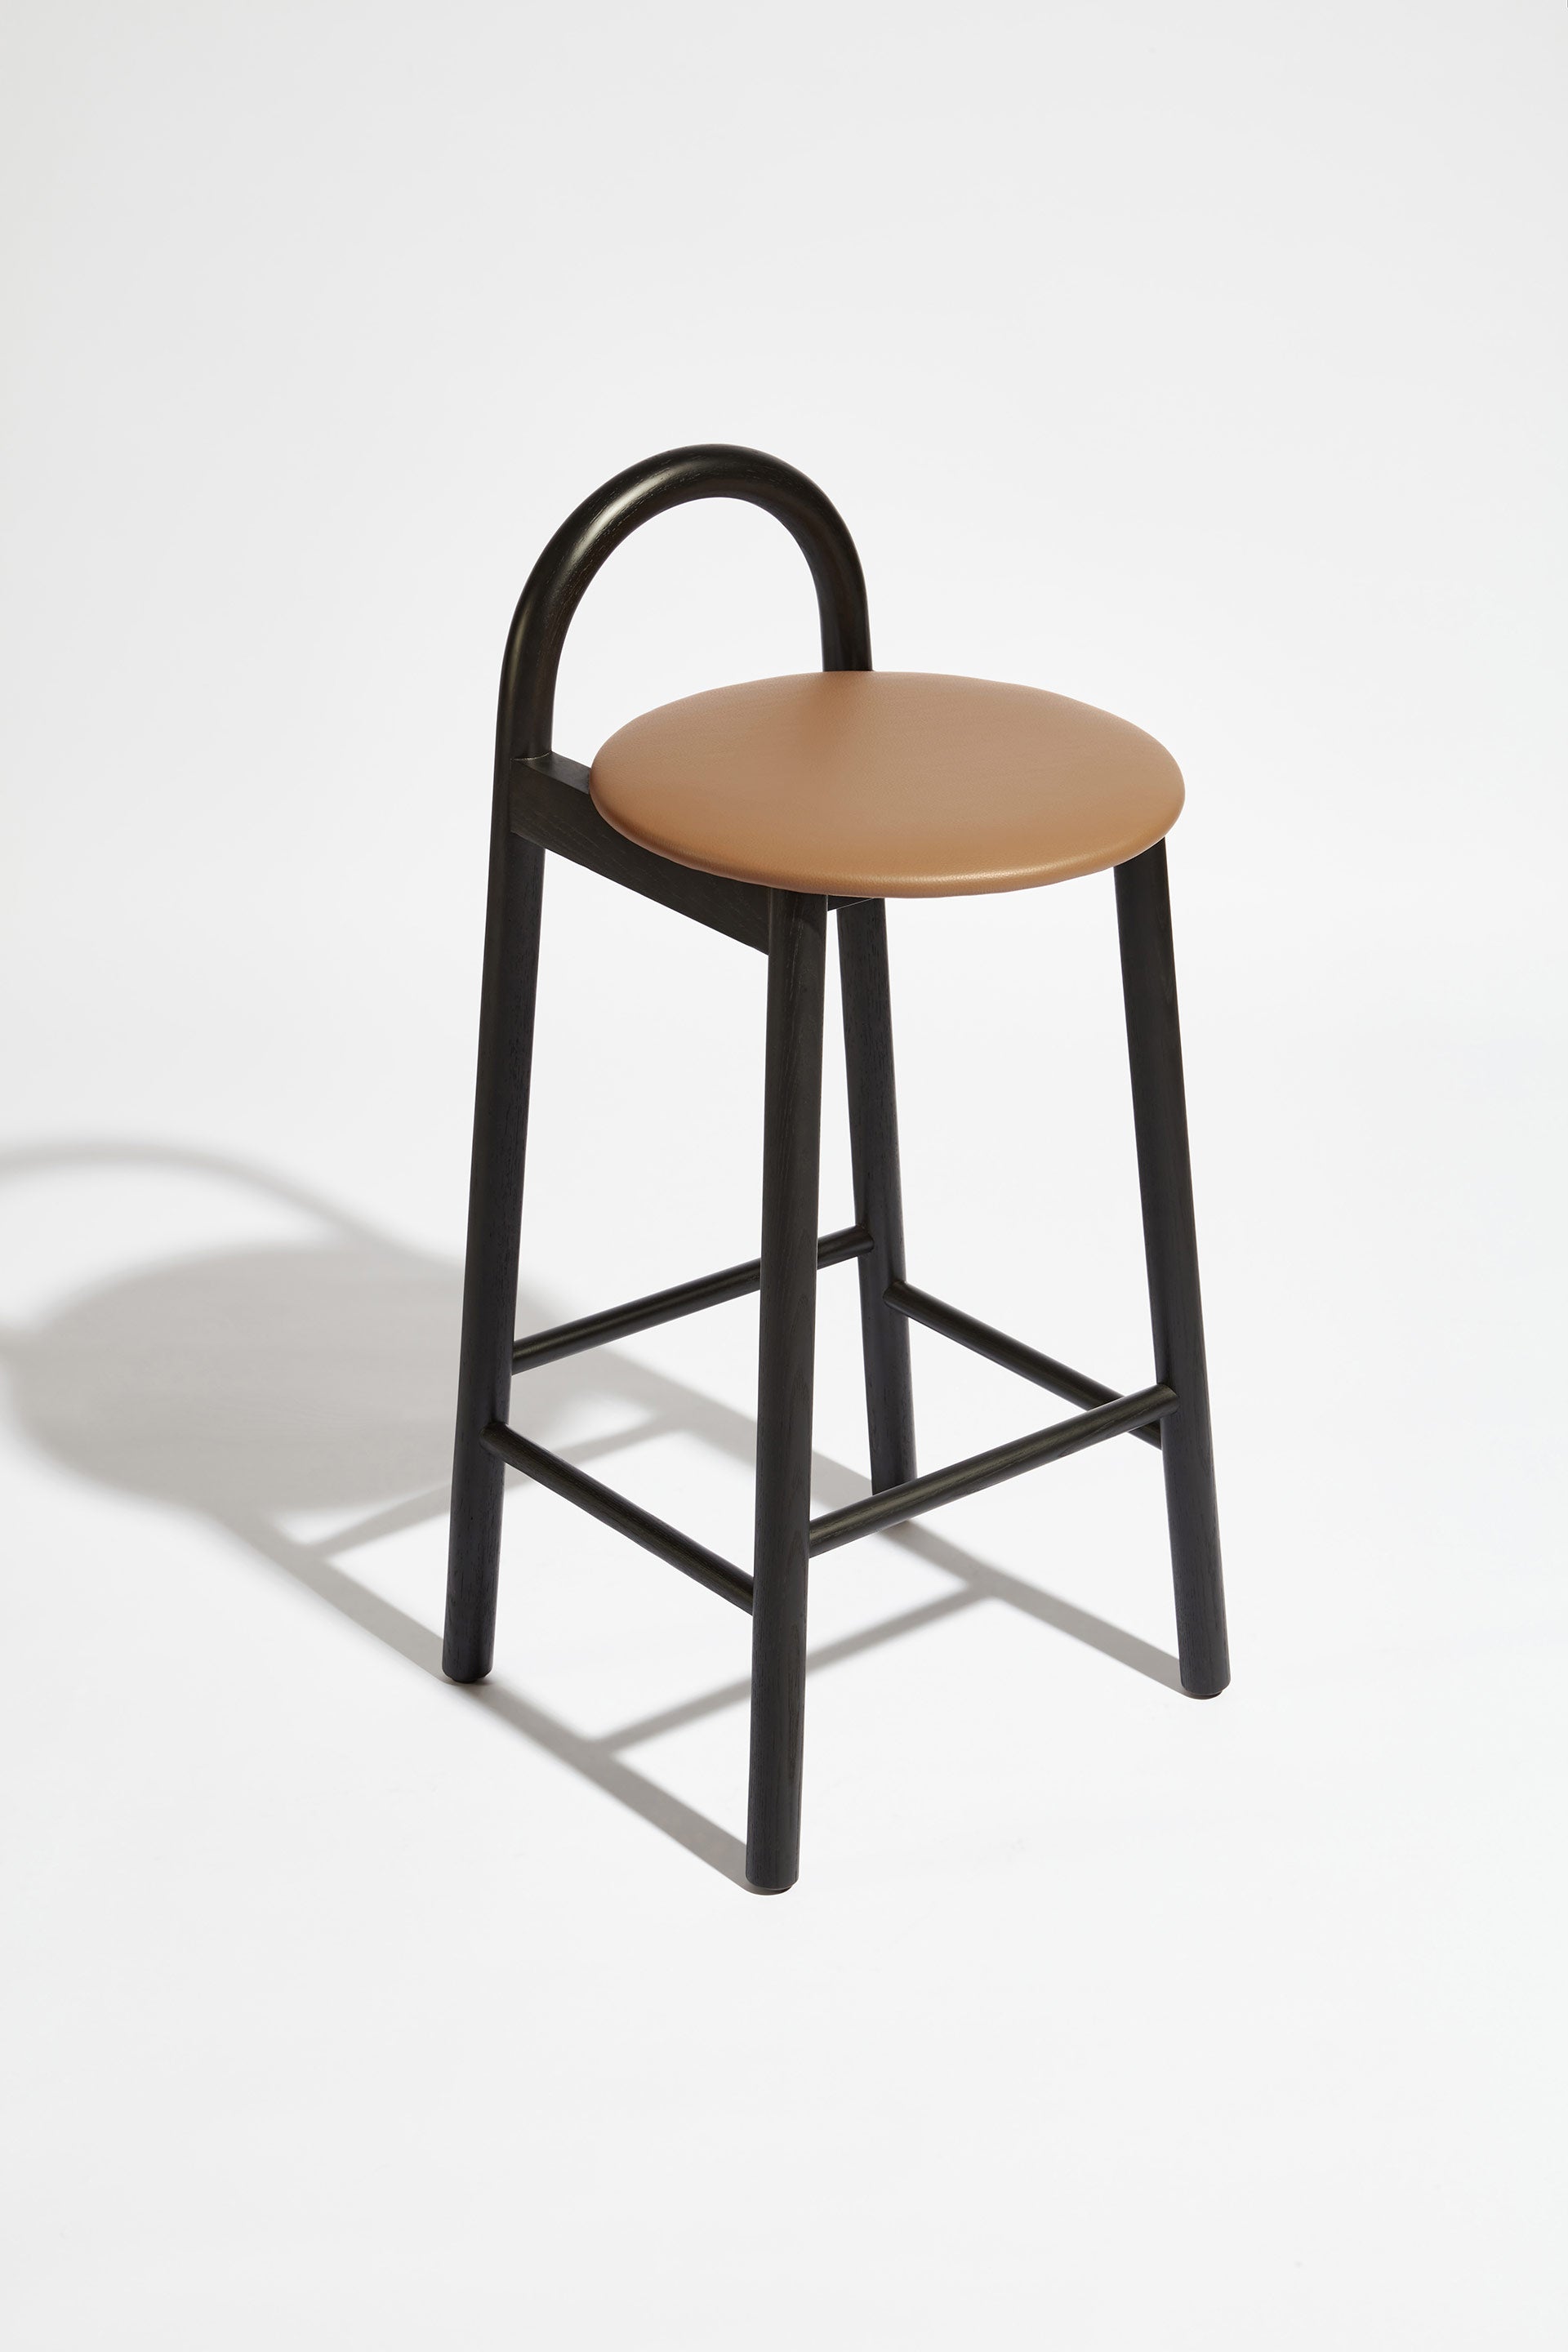 Bobby Timber Bar Counter Stool with leather seat pad | DesignByThem **  HF2 Maharam Lariat (Vinyl) 001 Camel / Black Stained